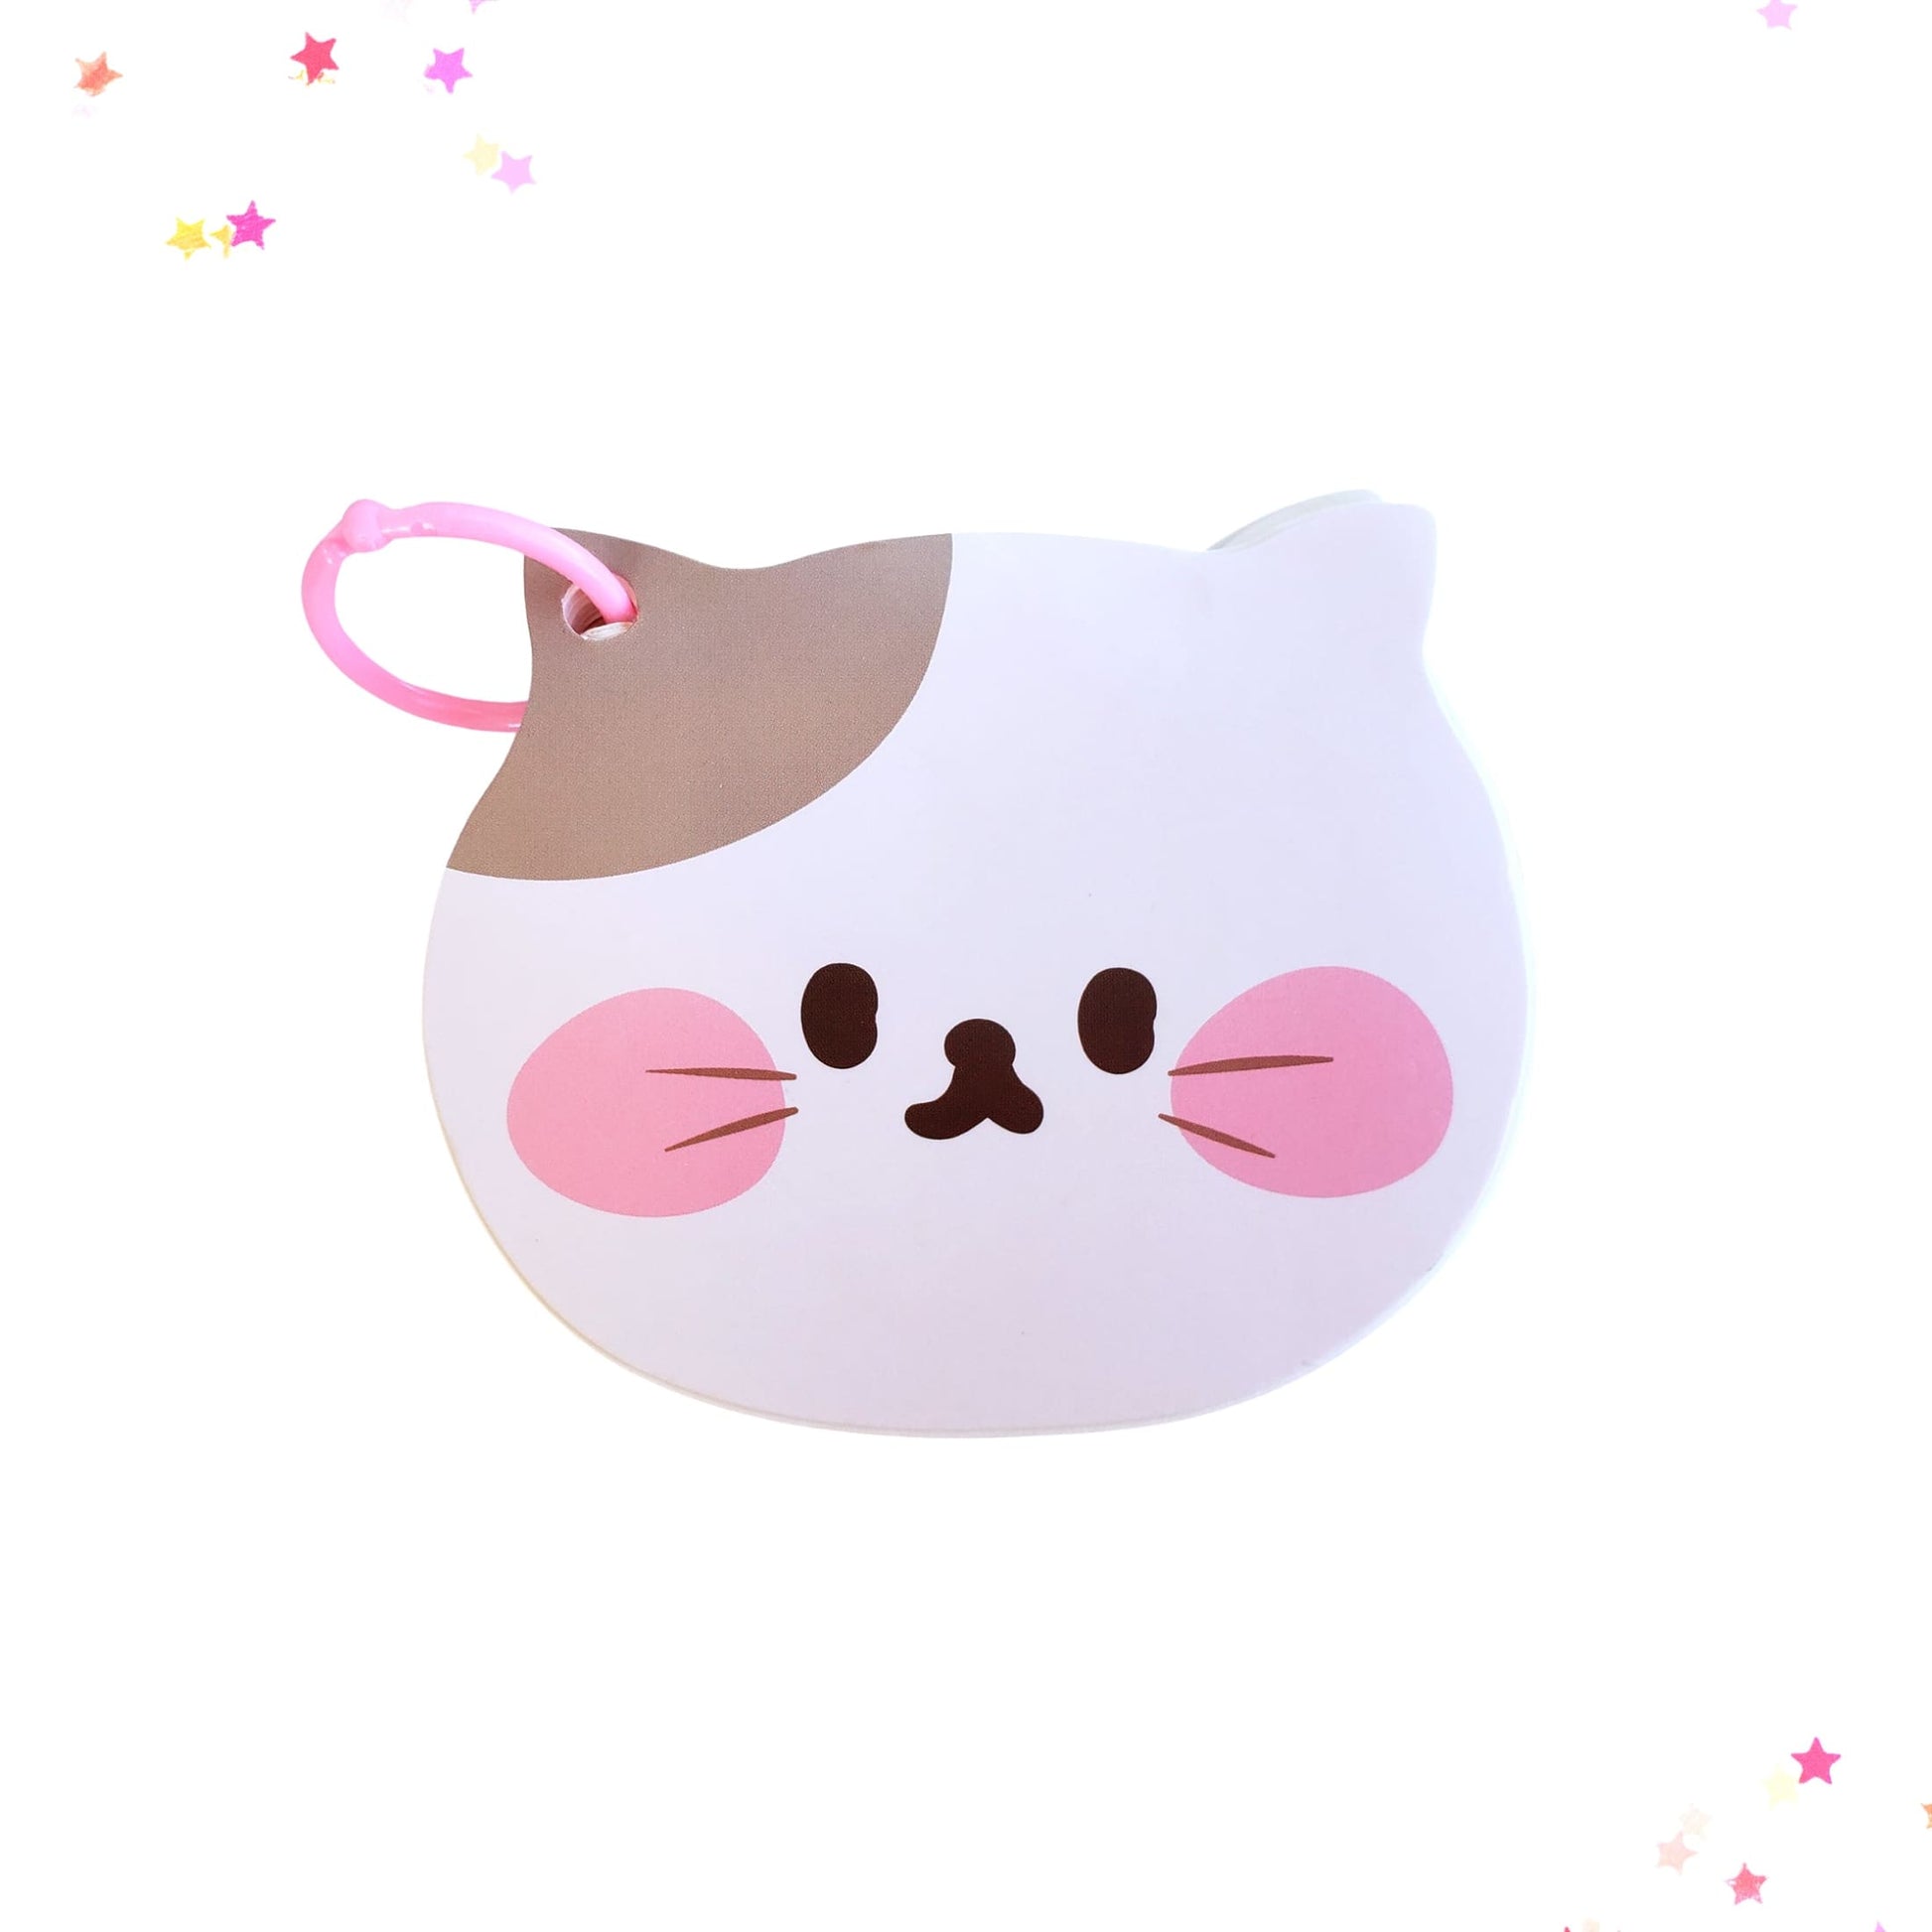 Kawaii Neko Cat Ringed Note Pad from Confetti Kitty, Only 4.99